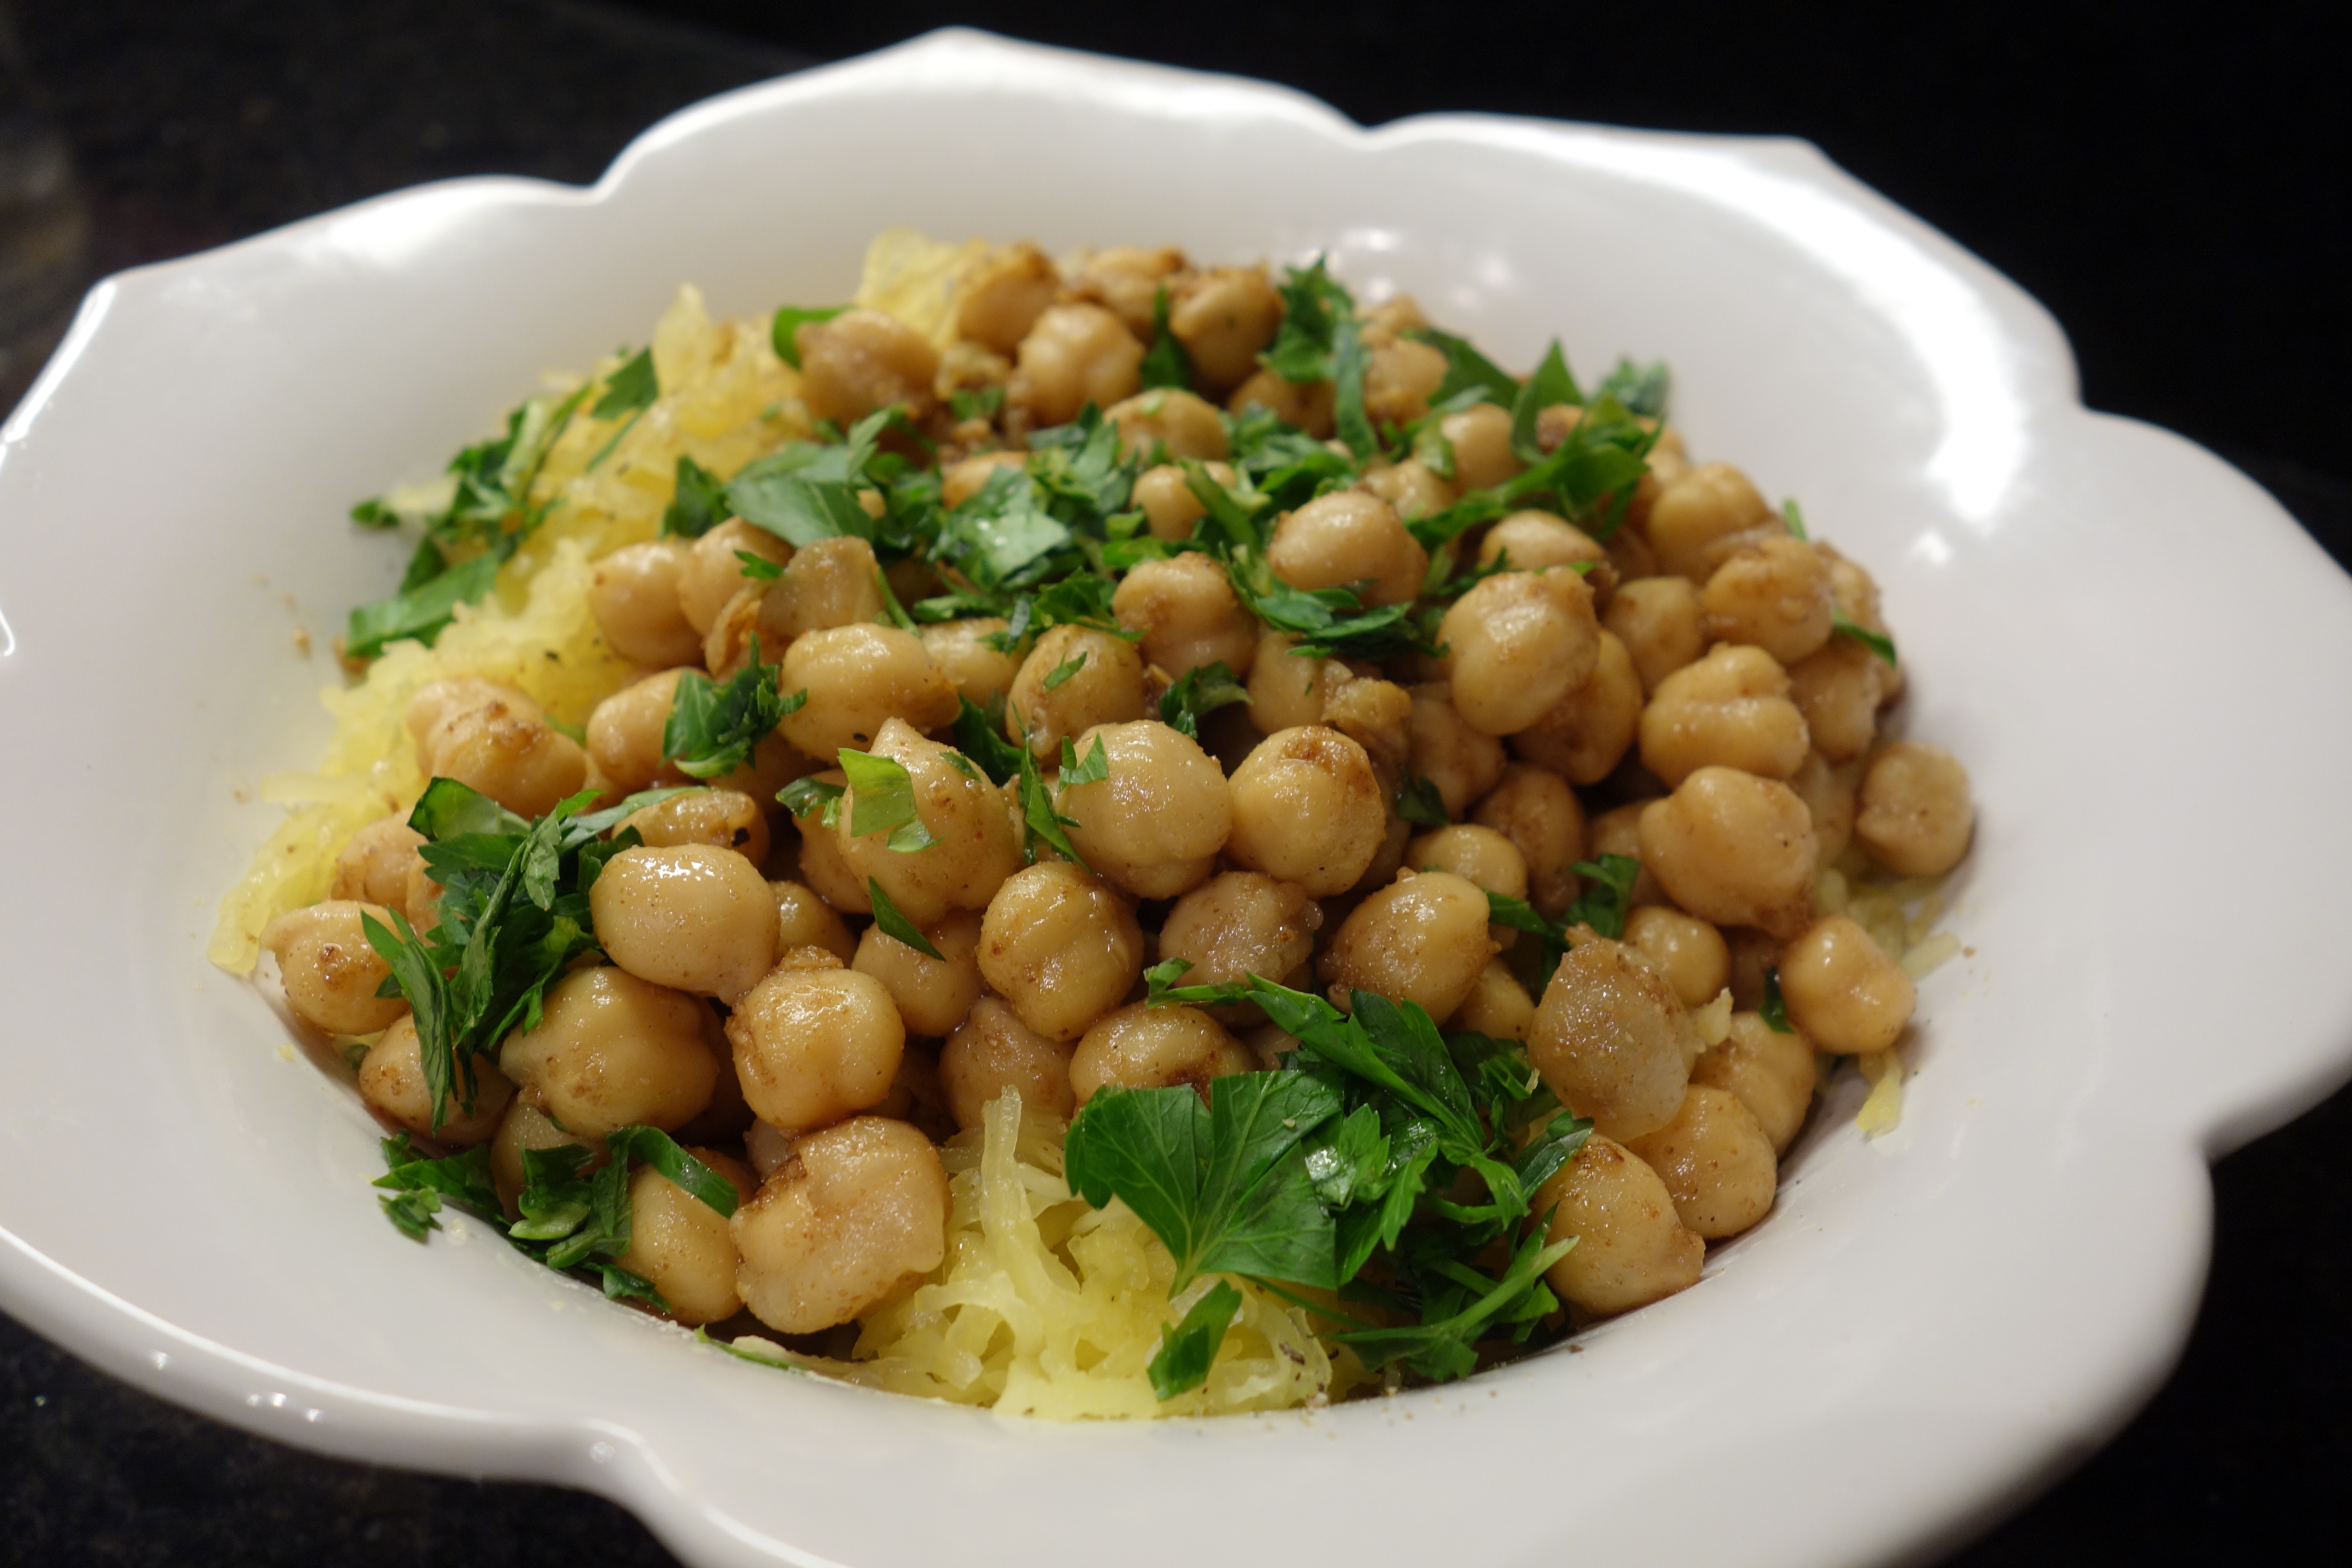 moroccan-spiced chickpeas and spaghetti squash :: by radish*rose